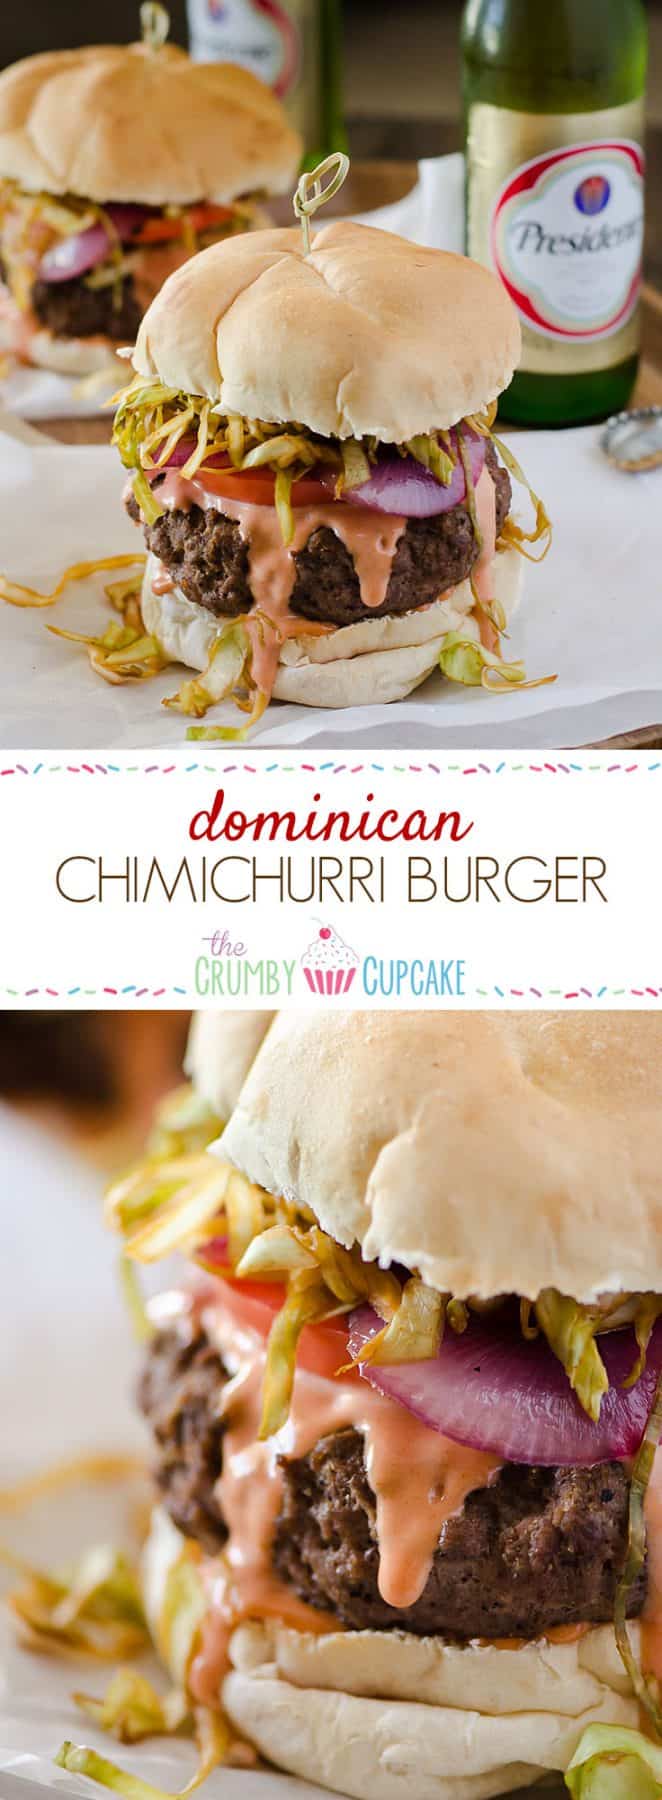 A saucy, simply seasoned burger, topped with sauteed cabbage, tomato and onion, the Chimichurri Burger is Dominican street food at its finest!